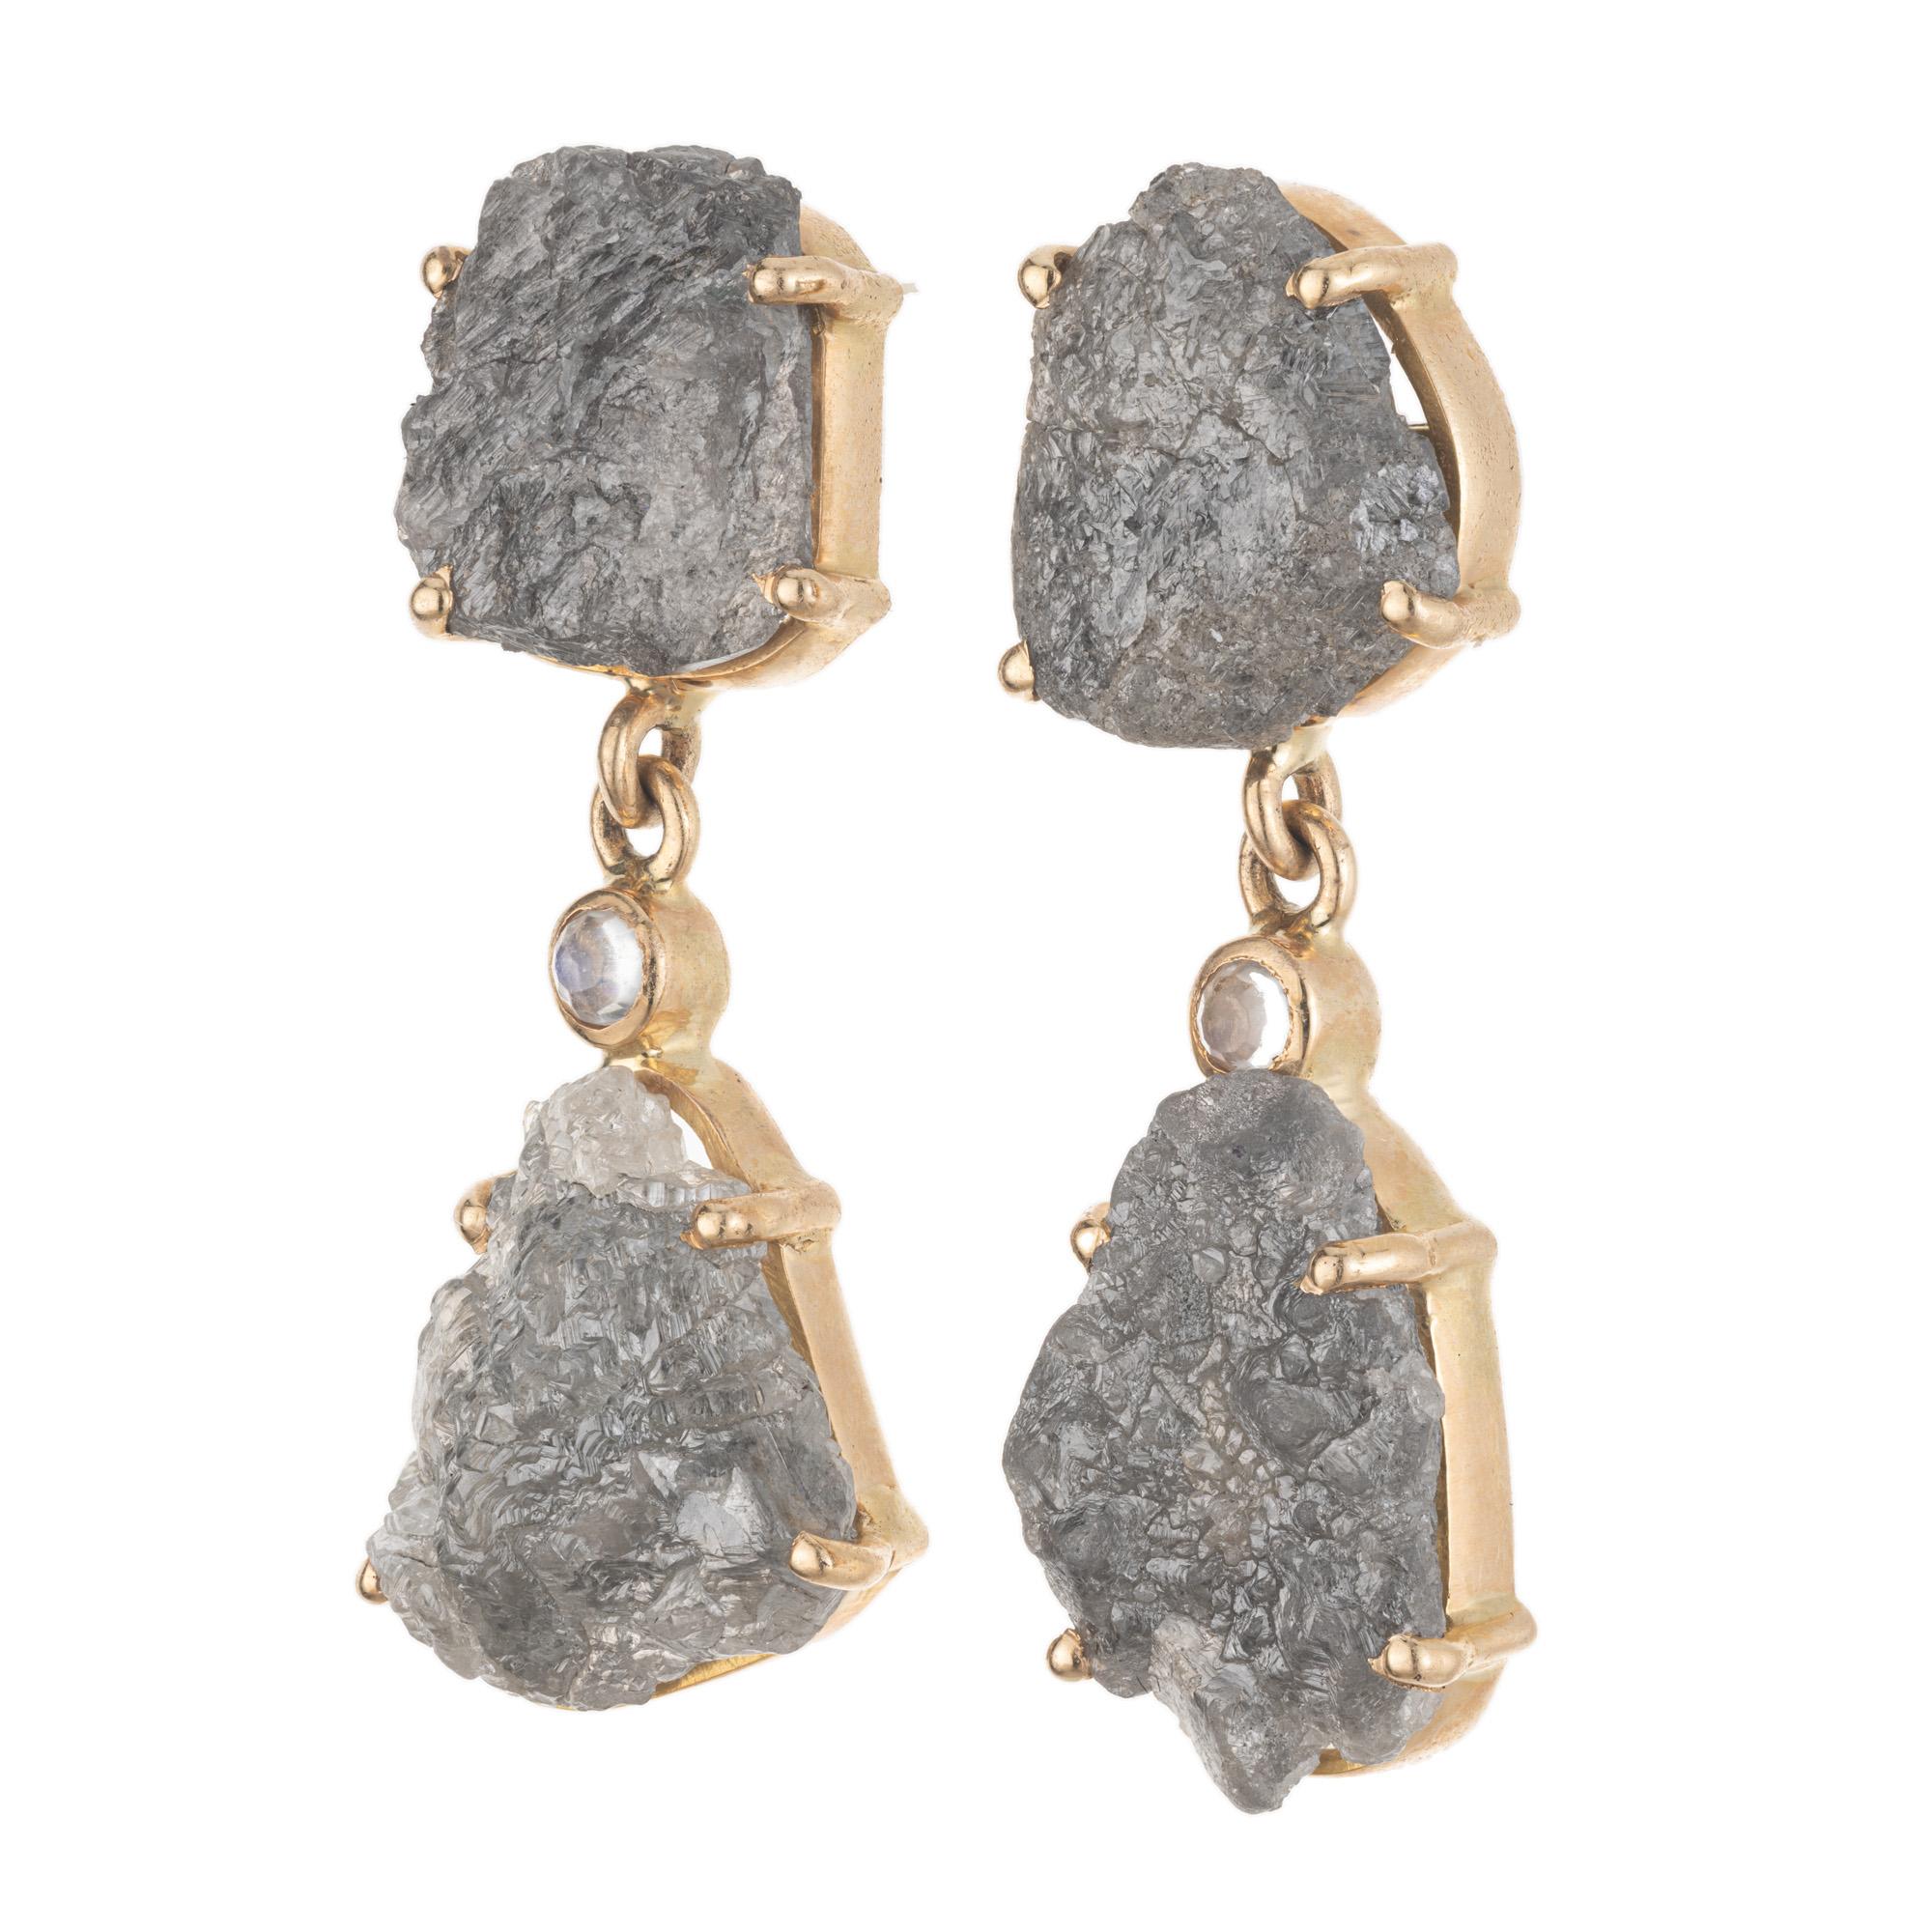 Rustic Salt and Pepper Yellow Gold Dangle Earrings. 8.00 carats of dazzling salt and pepper diamond slices that are accented by bezel set round moonstones. The captivating 18k yellow gold setting adds a warm and inviting touch to the overall design,